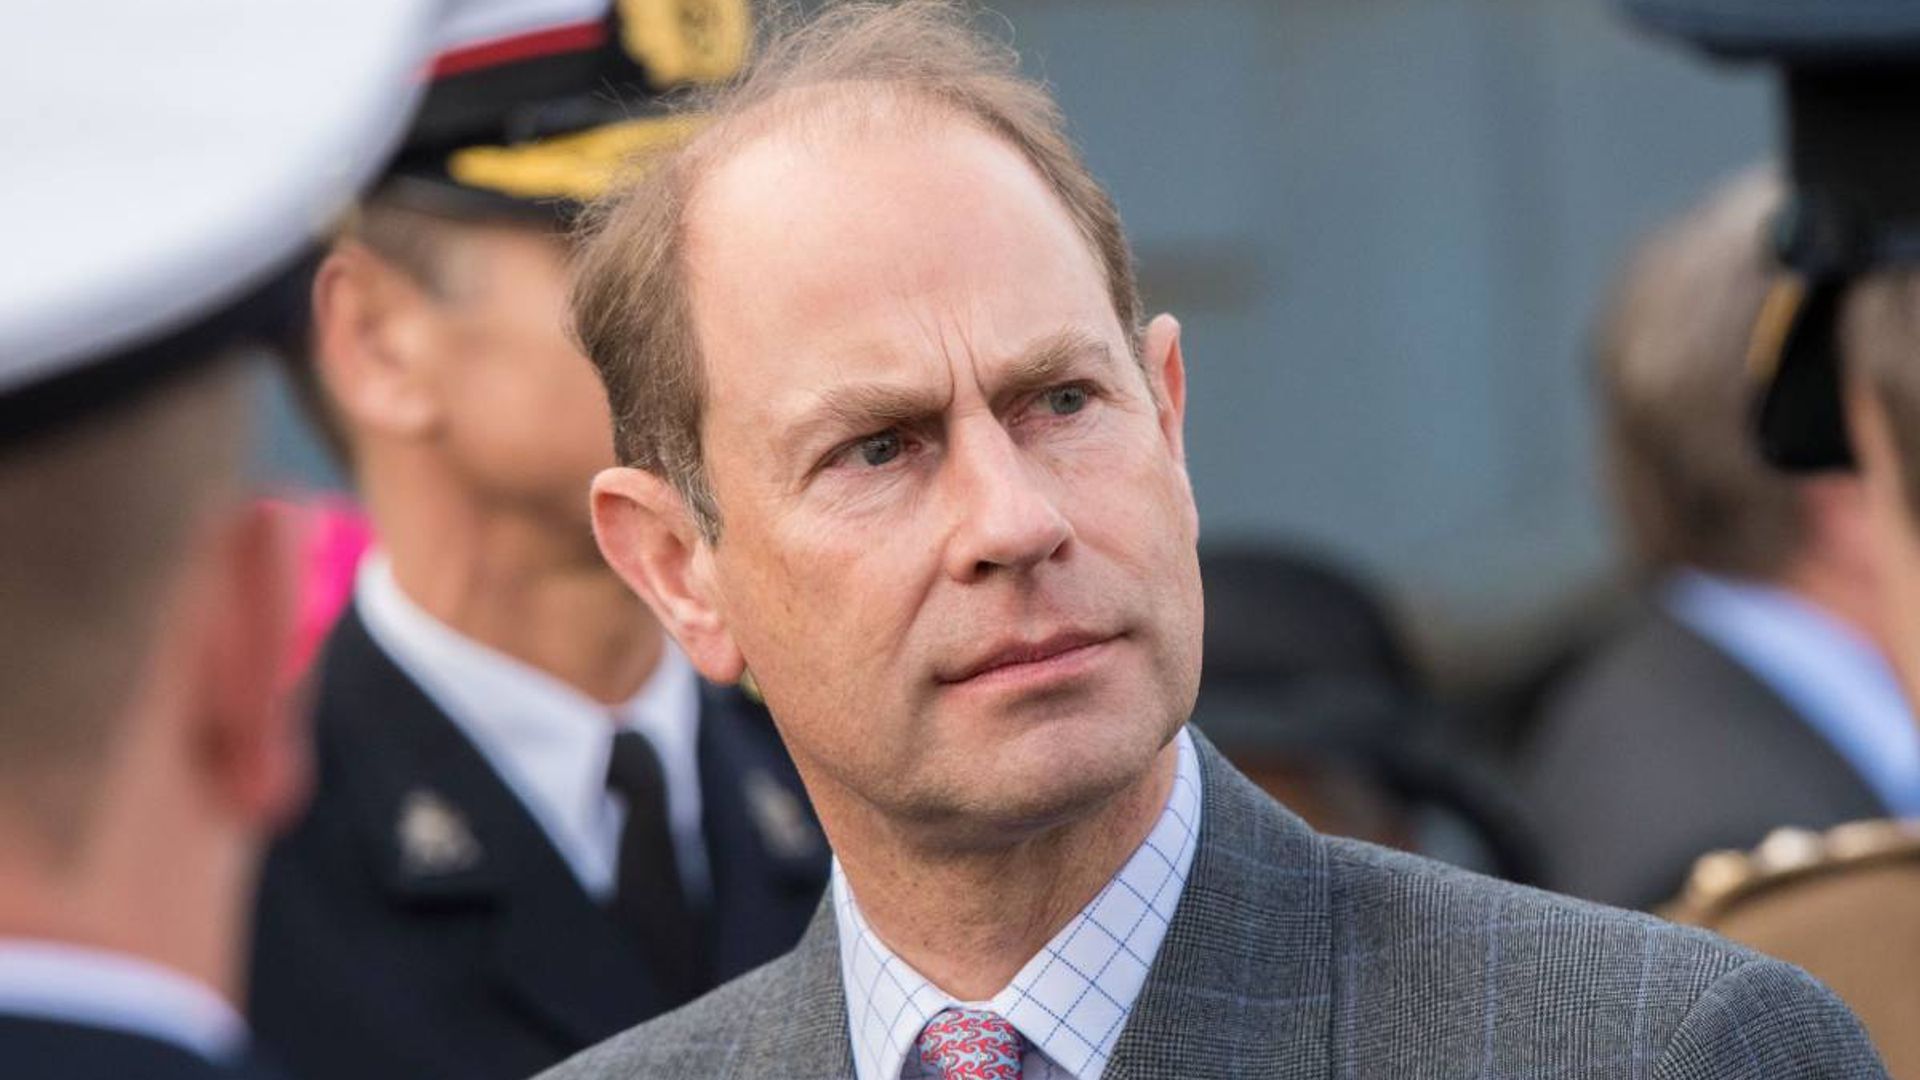 prince edward missing from royal event